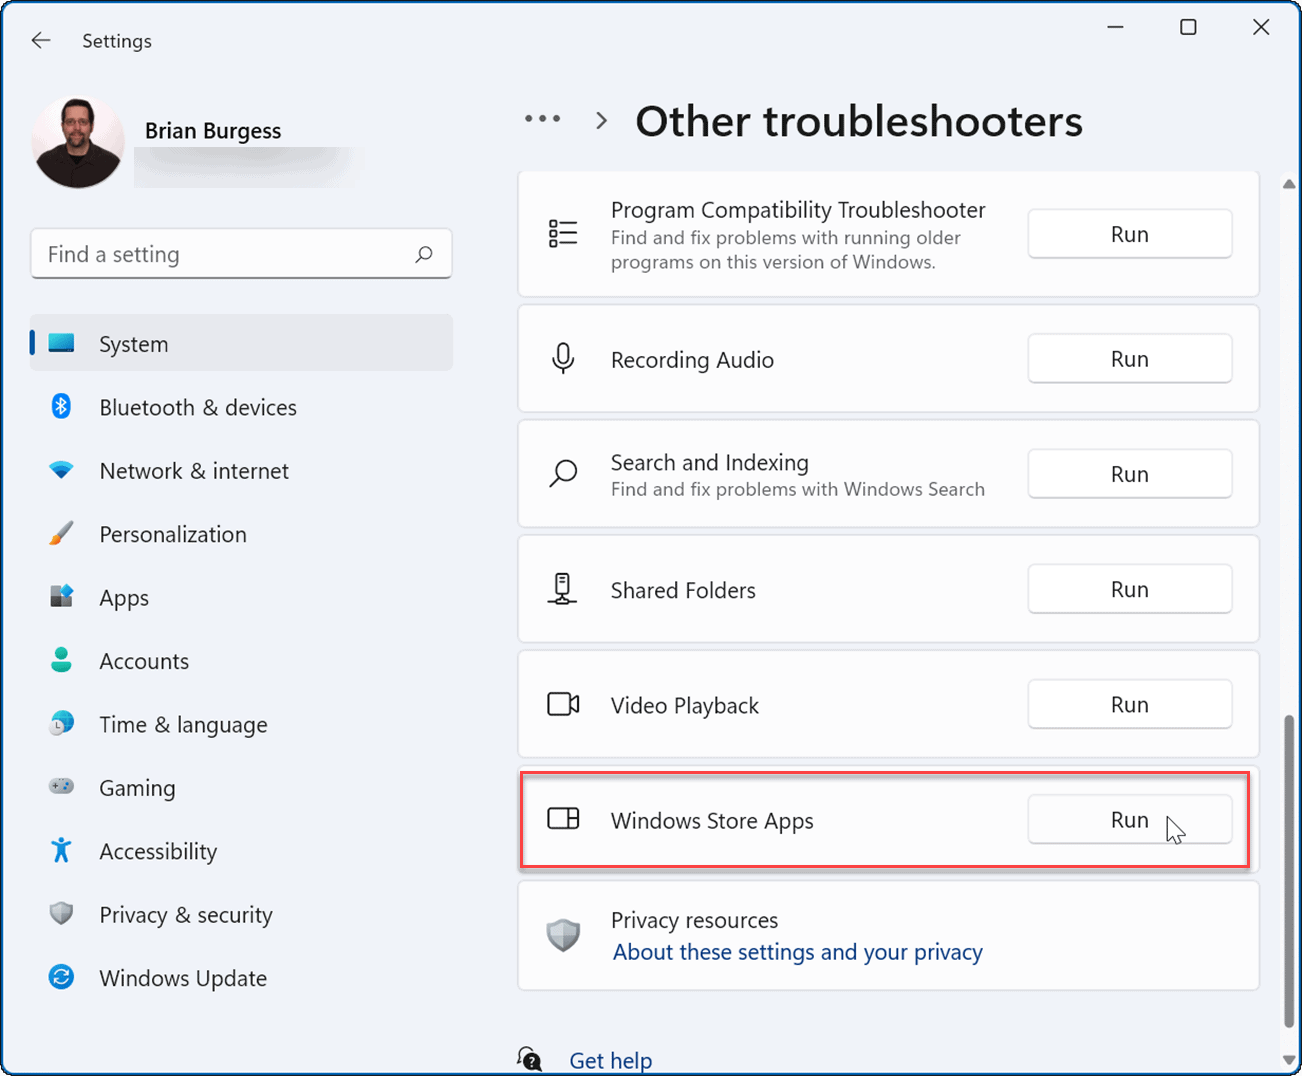 Windows Store Apps troubleshooter